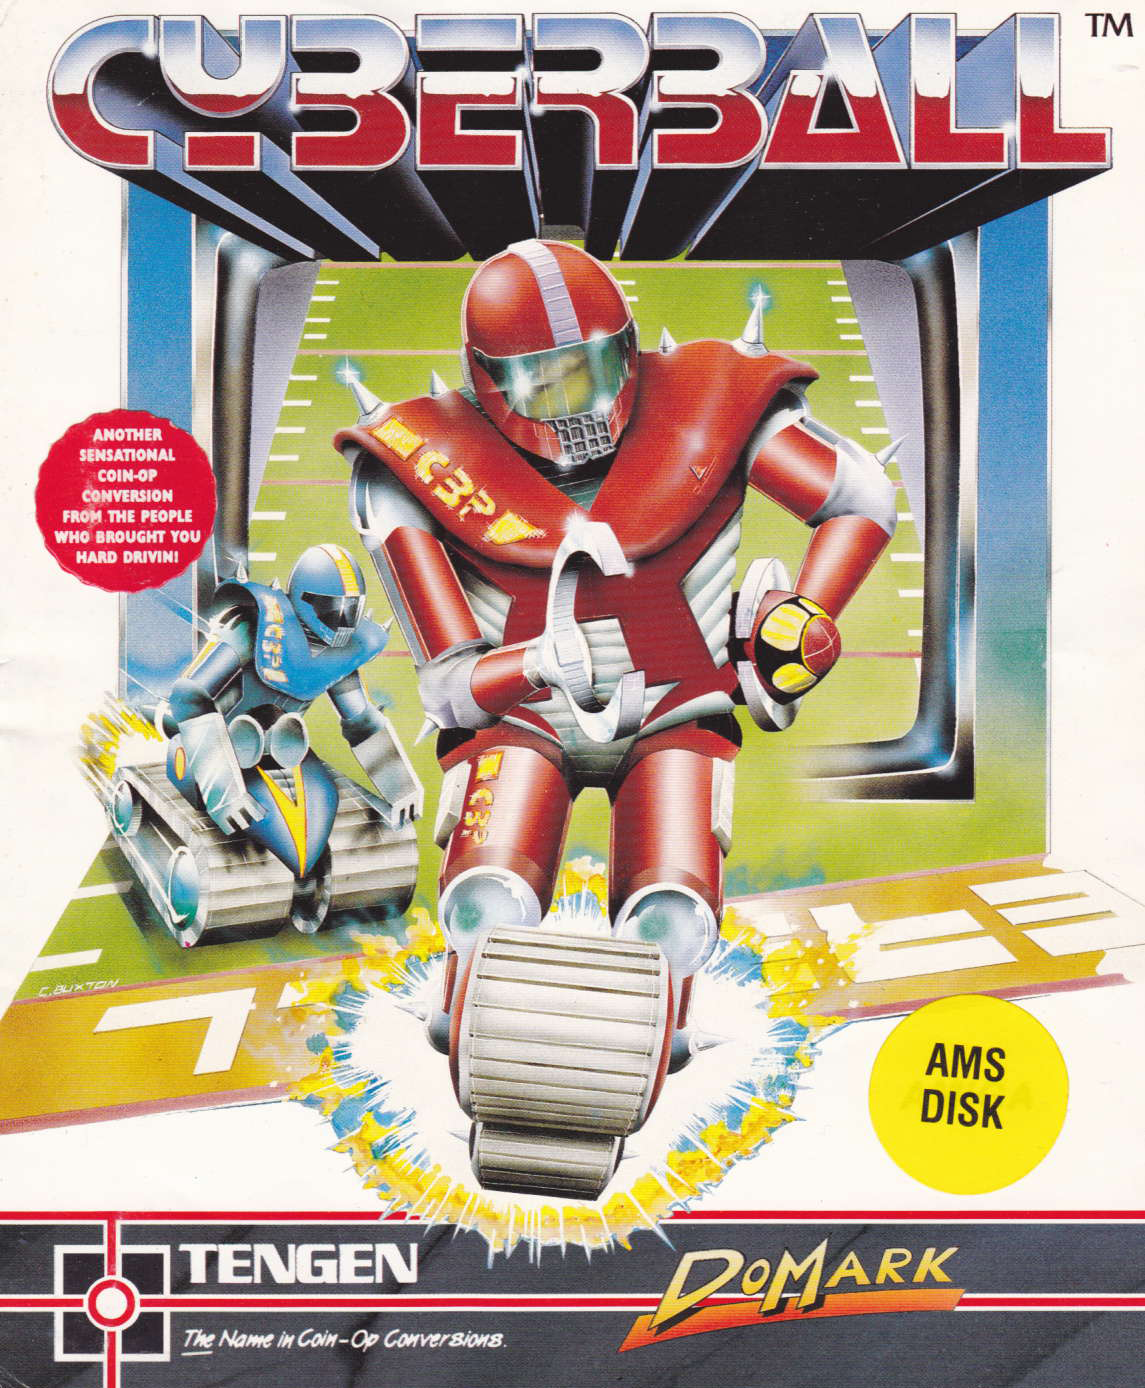 cover of the Amstrad CPC game Cyberball  by GameBase CPC